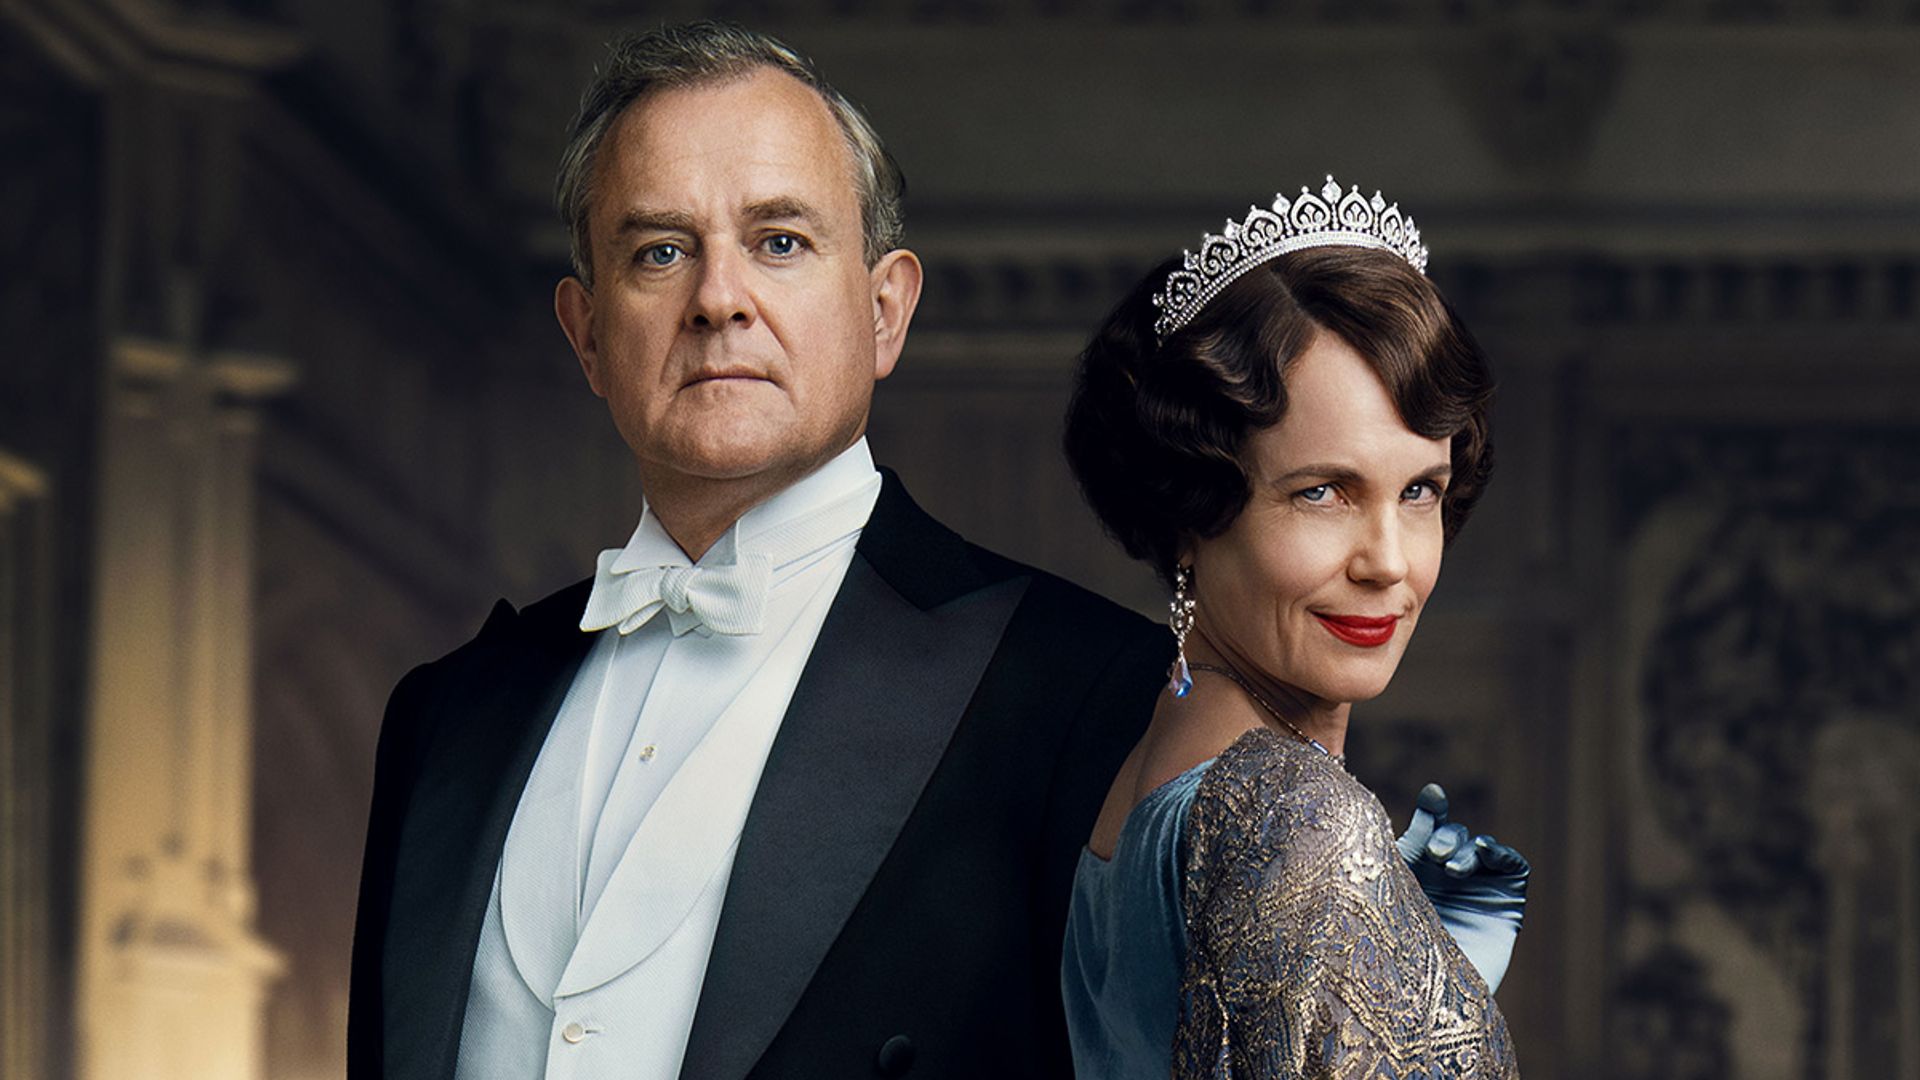 Downton Abbey film sequel set for Christmas release – report